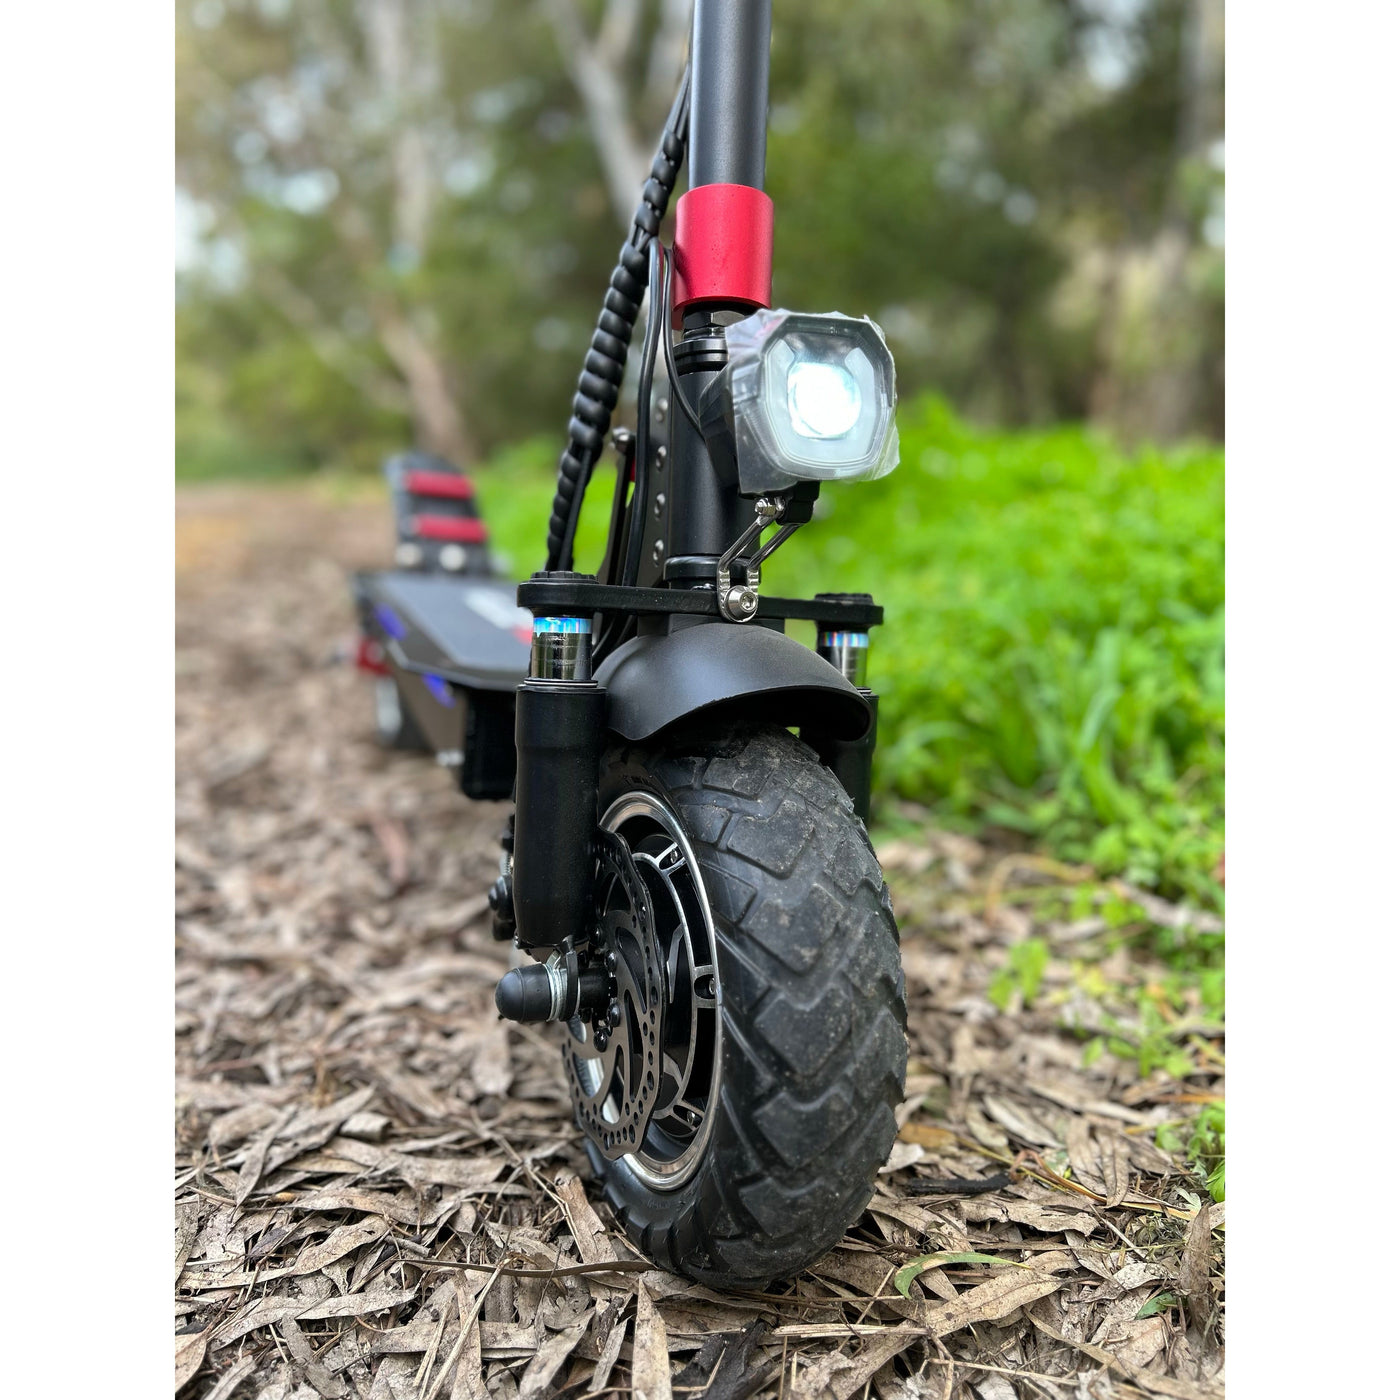 ELECTRIC SCOOTER VELOZ V1 SINGLE MOTOR 1200W WITH KEYLOCK ALL TERRAIN 6 MONTHS FREE SERVICE Model 2022 - EOzzie Electric Vehicles